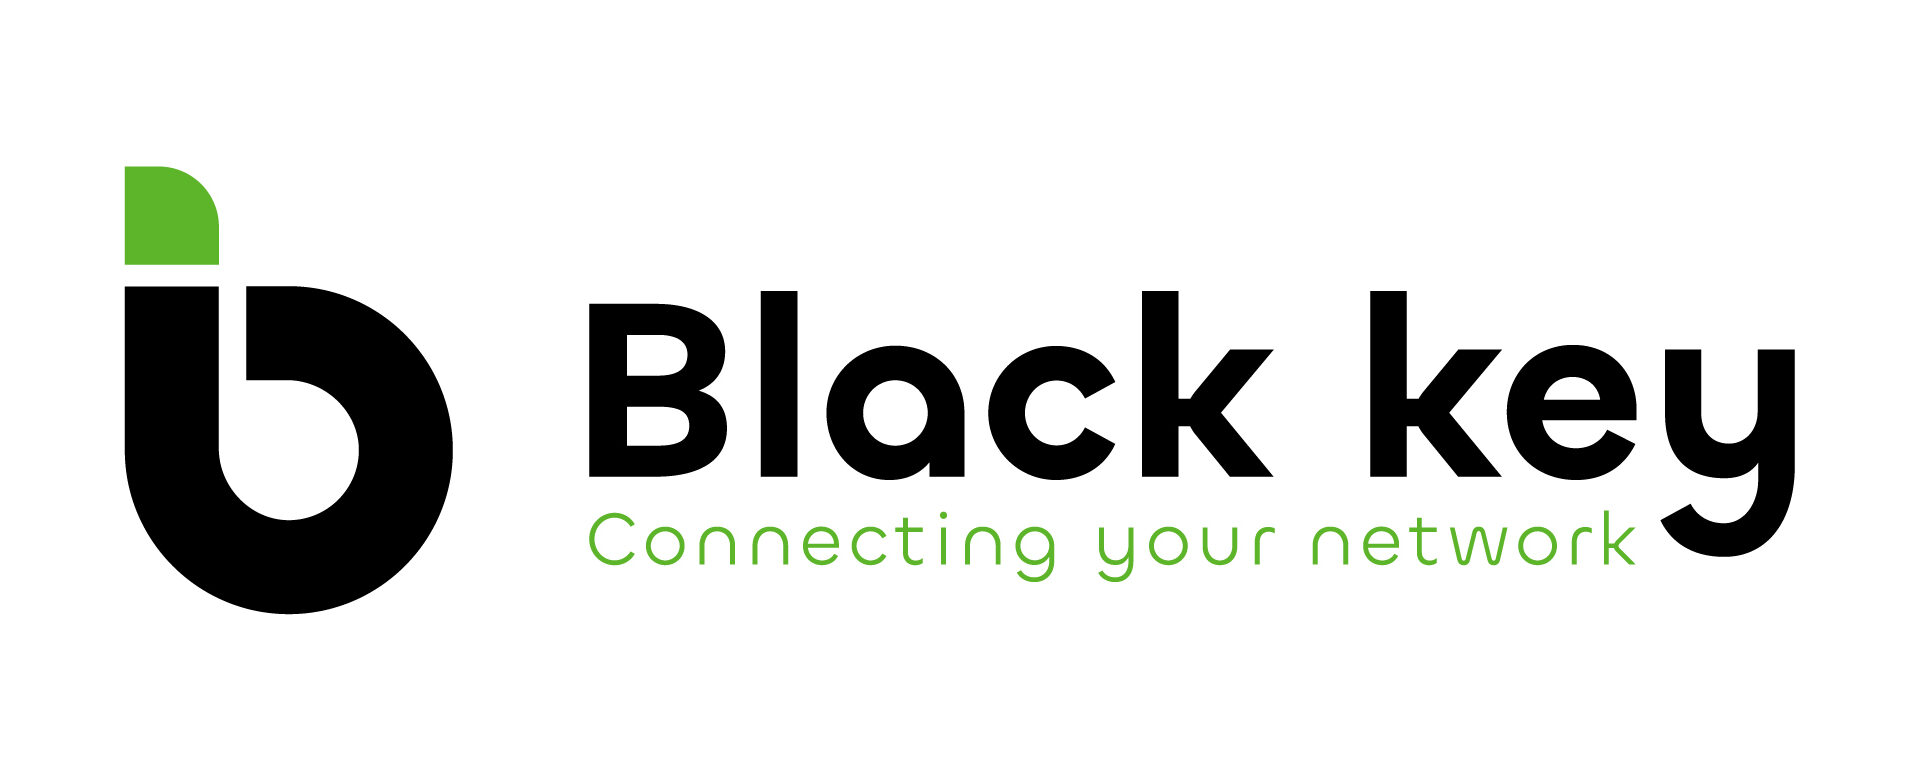 Blackkey – Connecting your Network